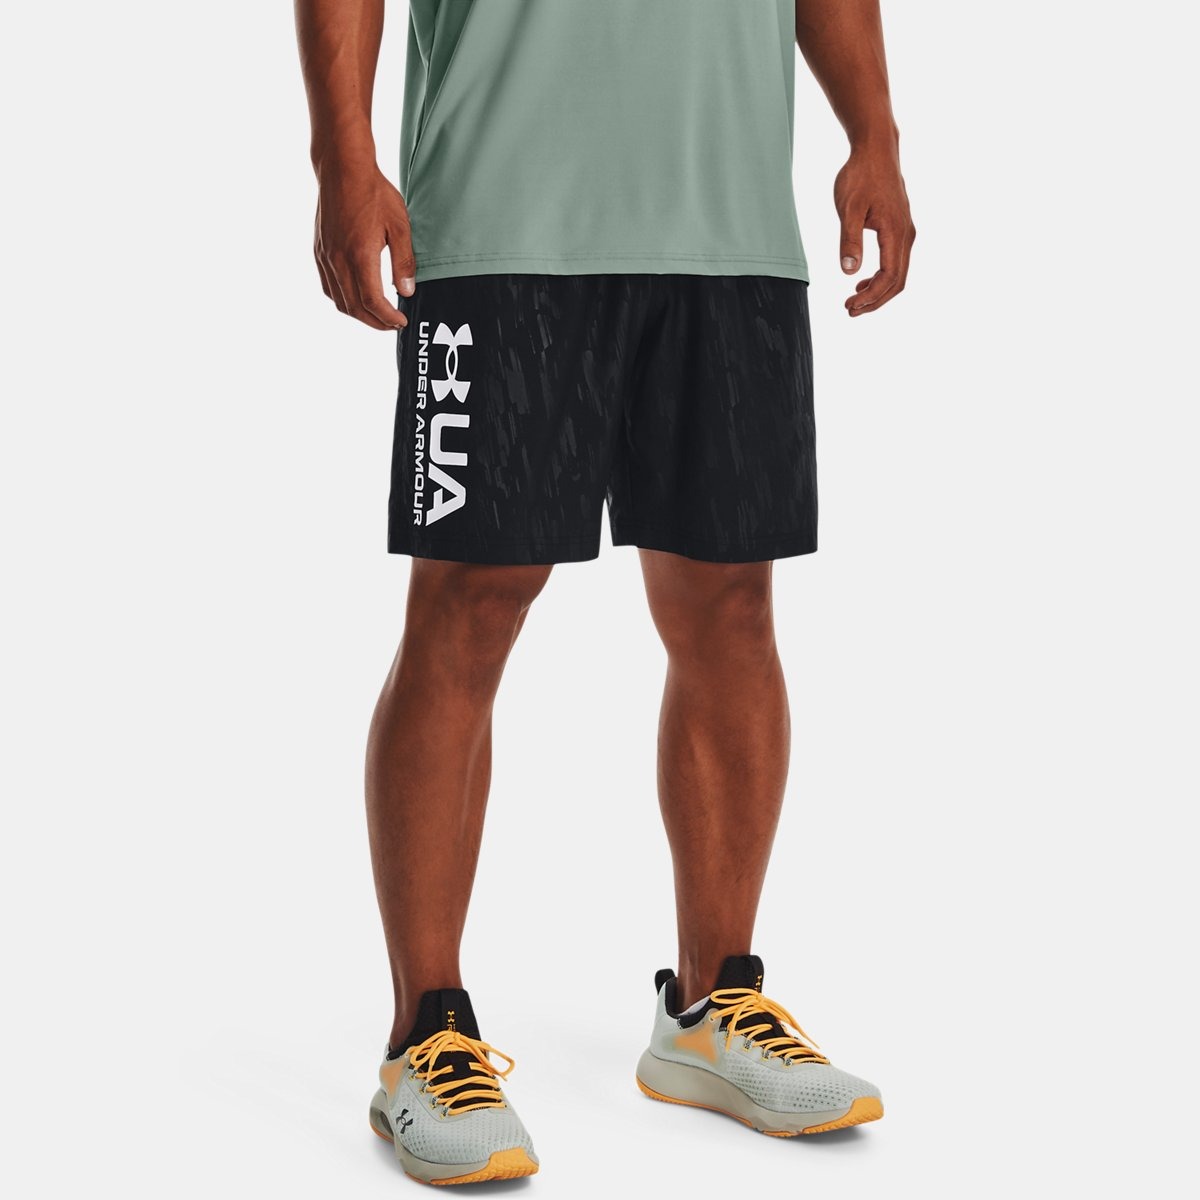 Shorts in Black for Men from Under Armour GOOFASH